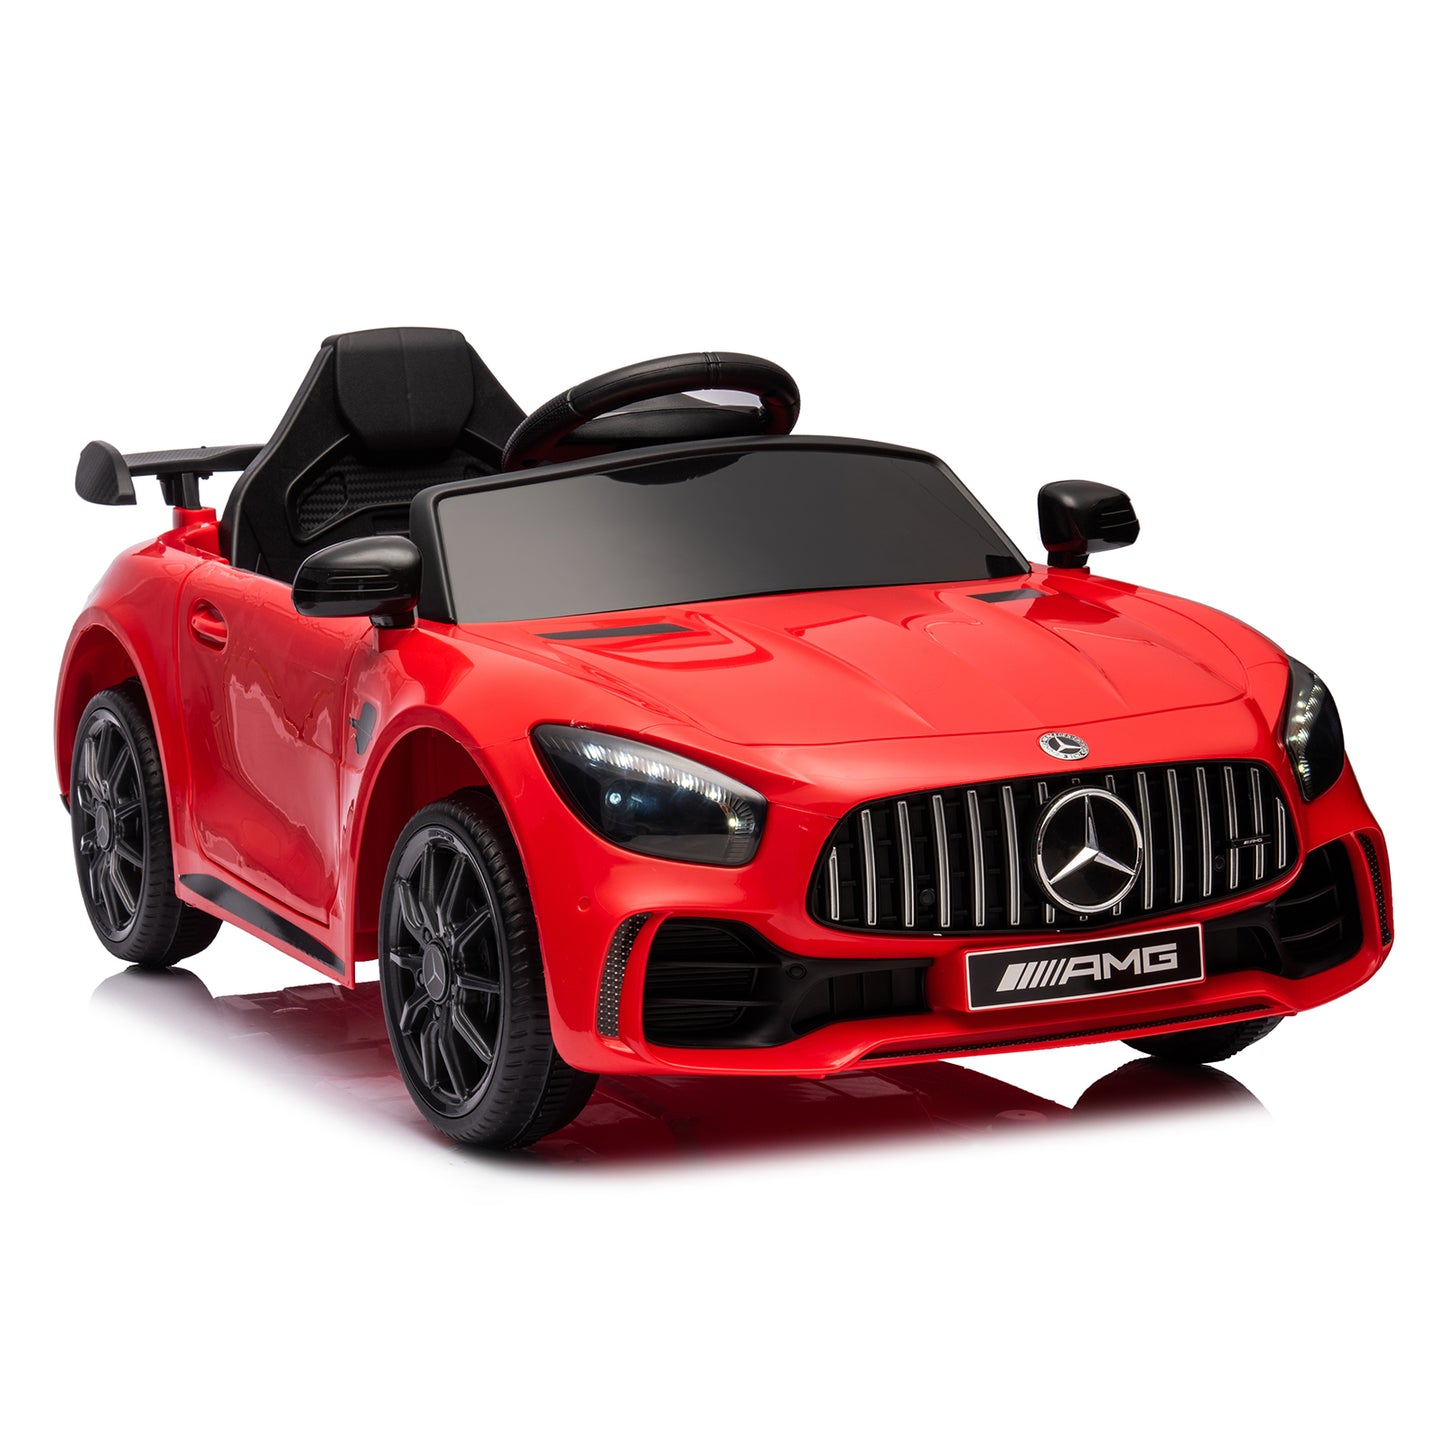 LEADZM Dual Drive 12V 4.5Ah with 2.4G Remote Control Mercedes-Benz Sports Car Red